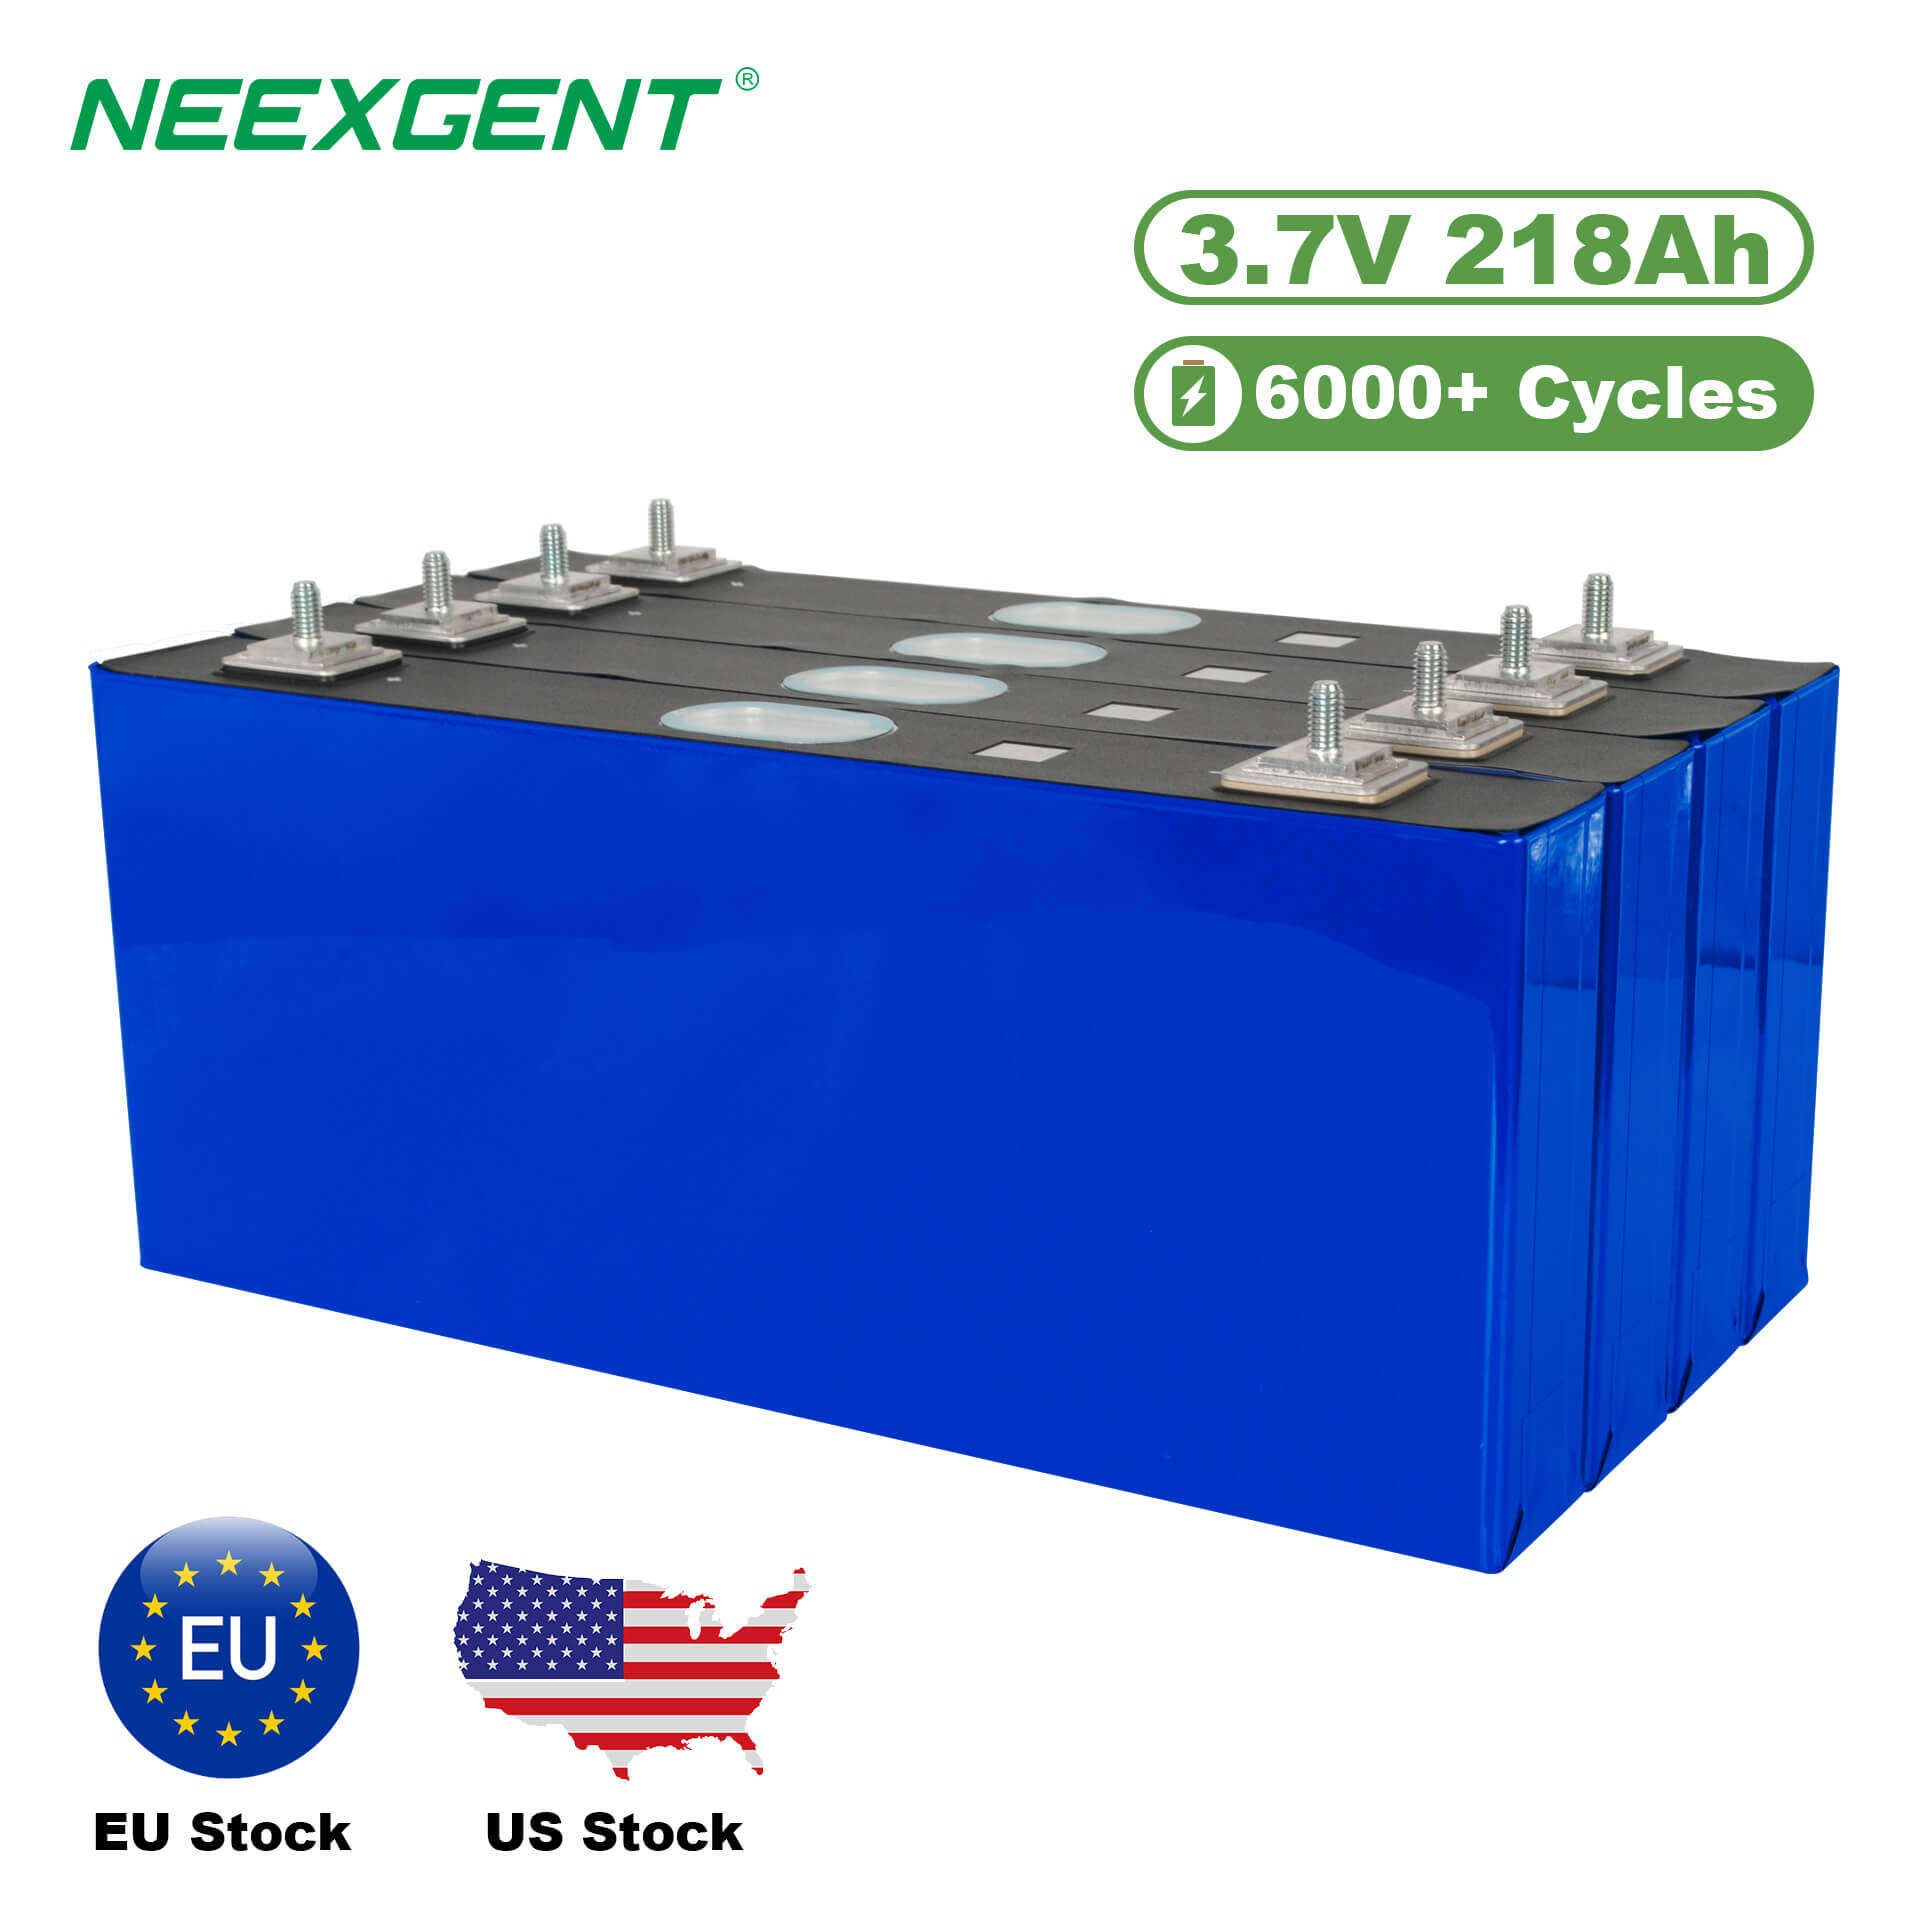 Neexgent 3.7v 218ah Lifepo4 Cell Lithium Ion Batteries Solar Batteries Genuine Grade A Lifepo4 Battery Cell